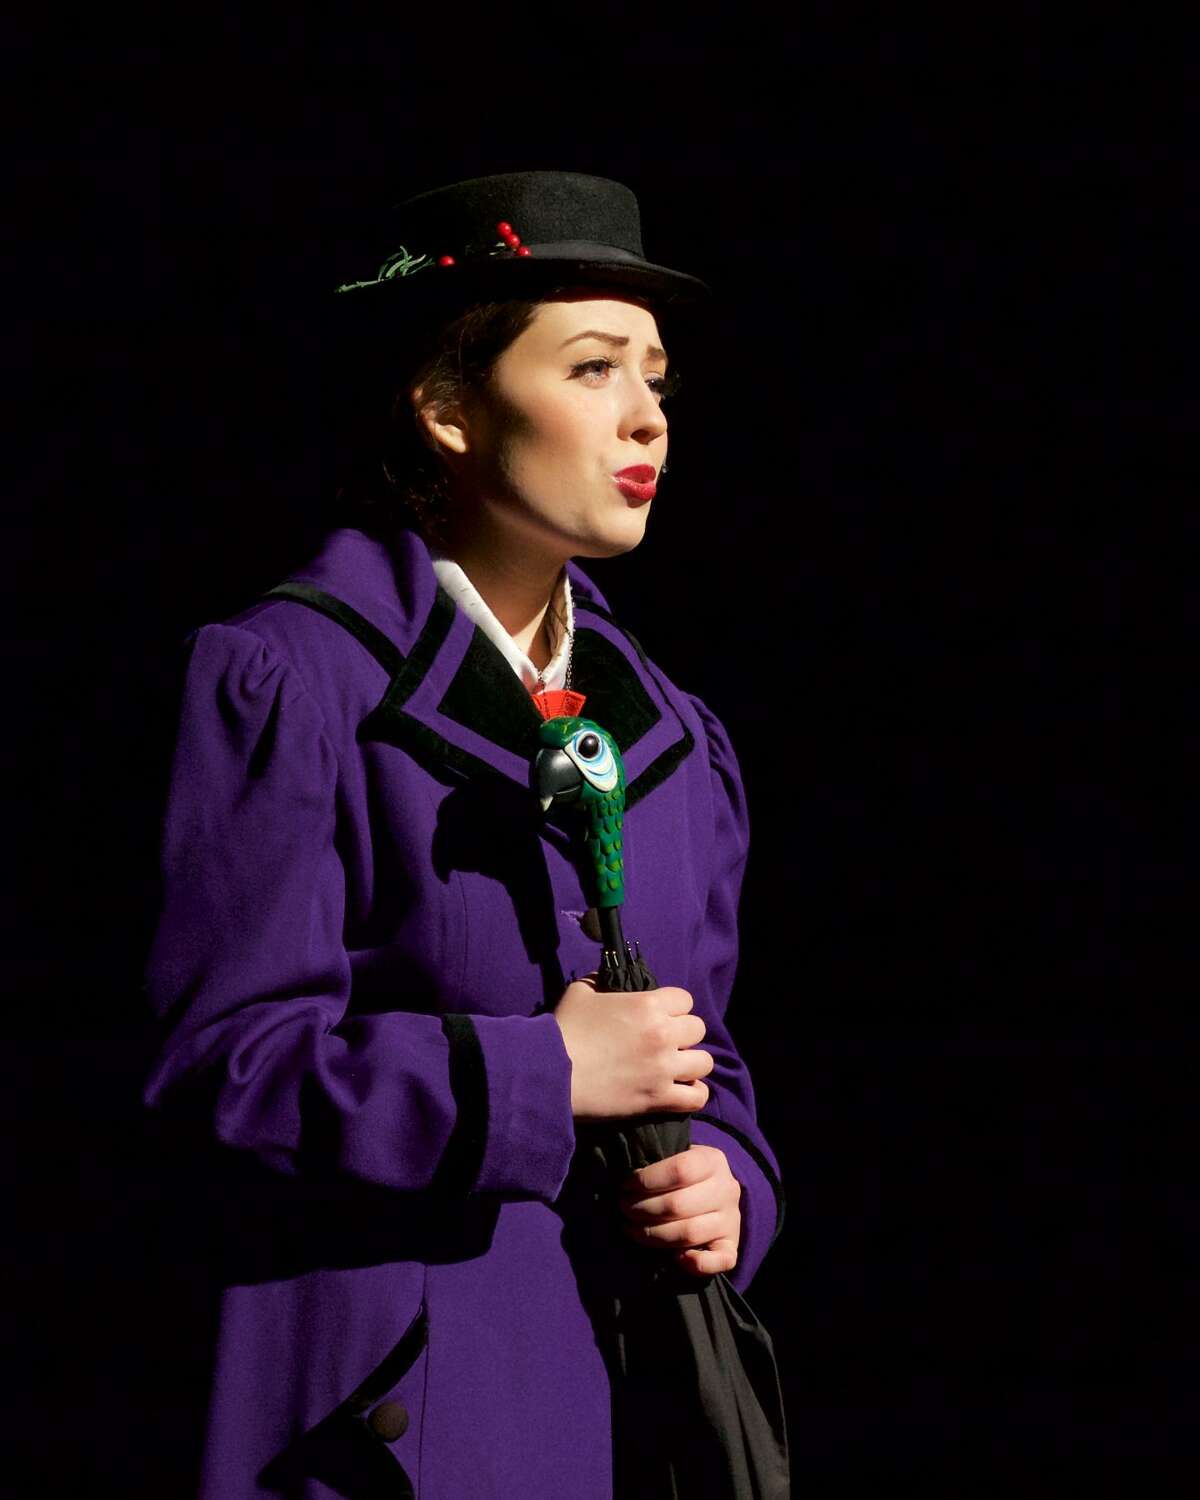 Mary Poppins (Cassie Bielmeier) sings "A Spoonful of Sugar" in the New Milford High School All School Musical (Disney and Cameron Mackintosh's) "Mary Poppins". Performances are this weekend (March 17, 18, & 19) and next weekend (March 24 & 25) for info or to make reservations call 860-350-6647 ext. 1552